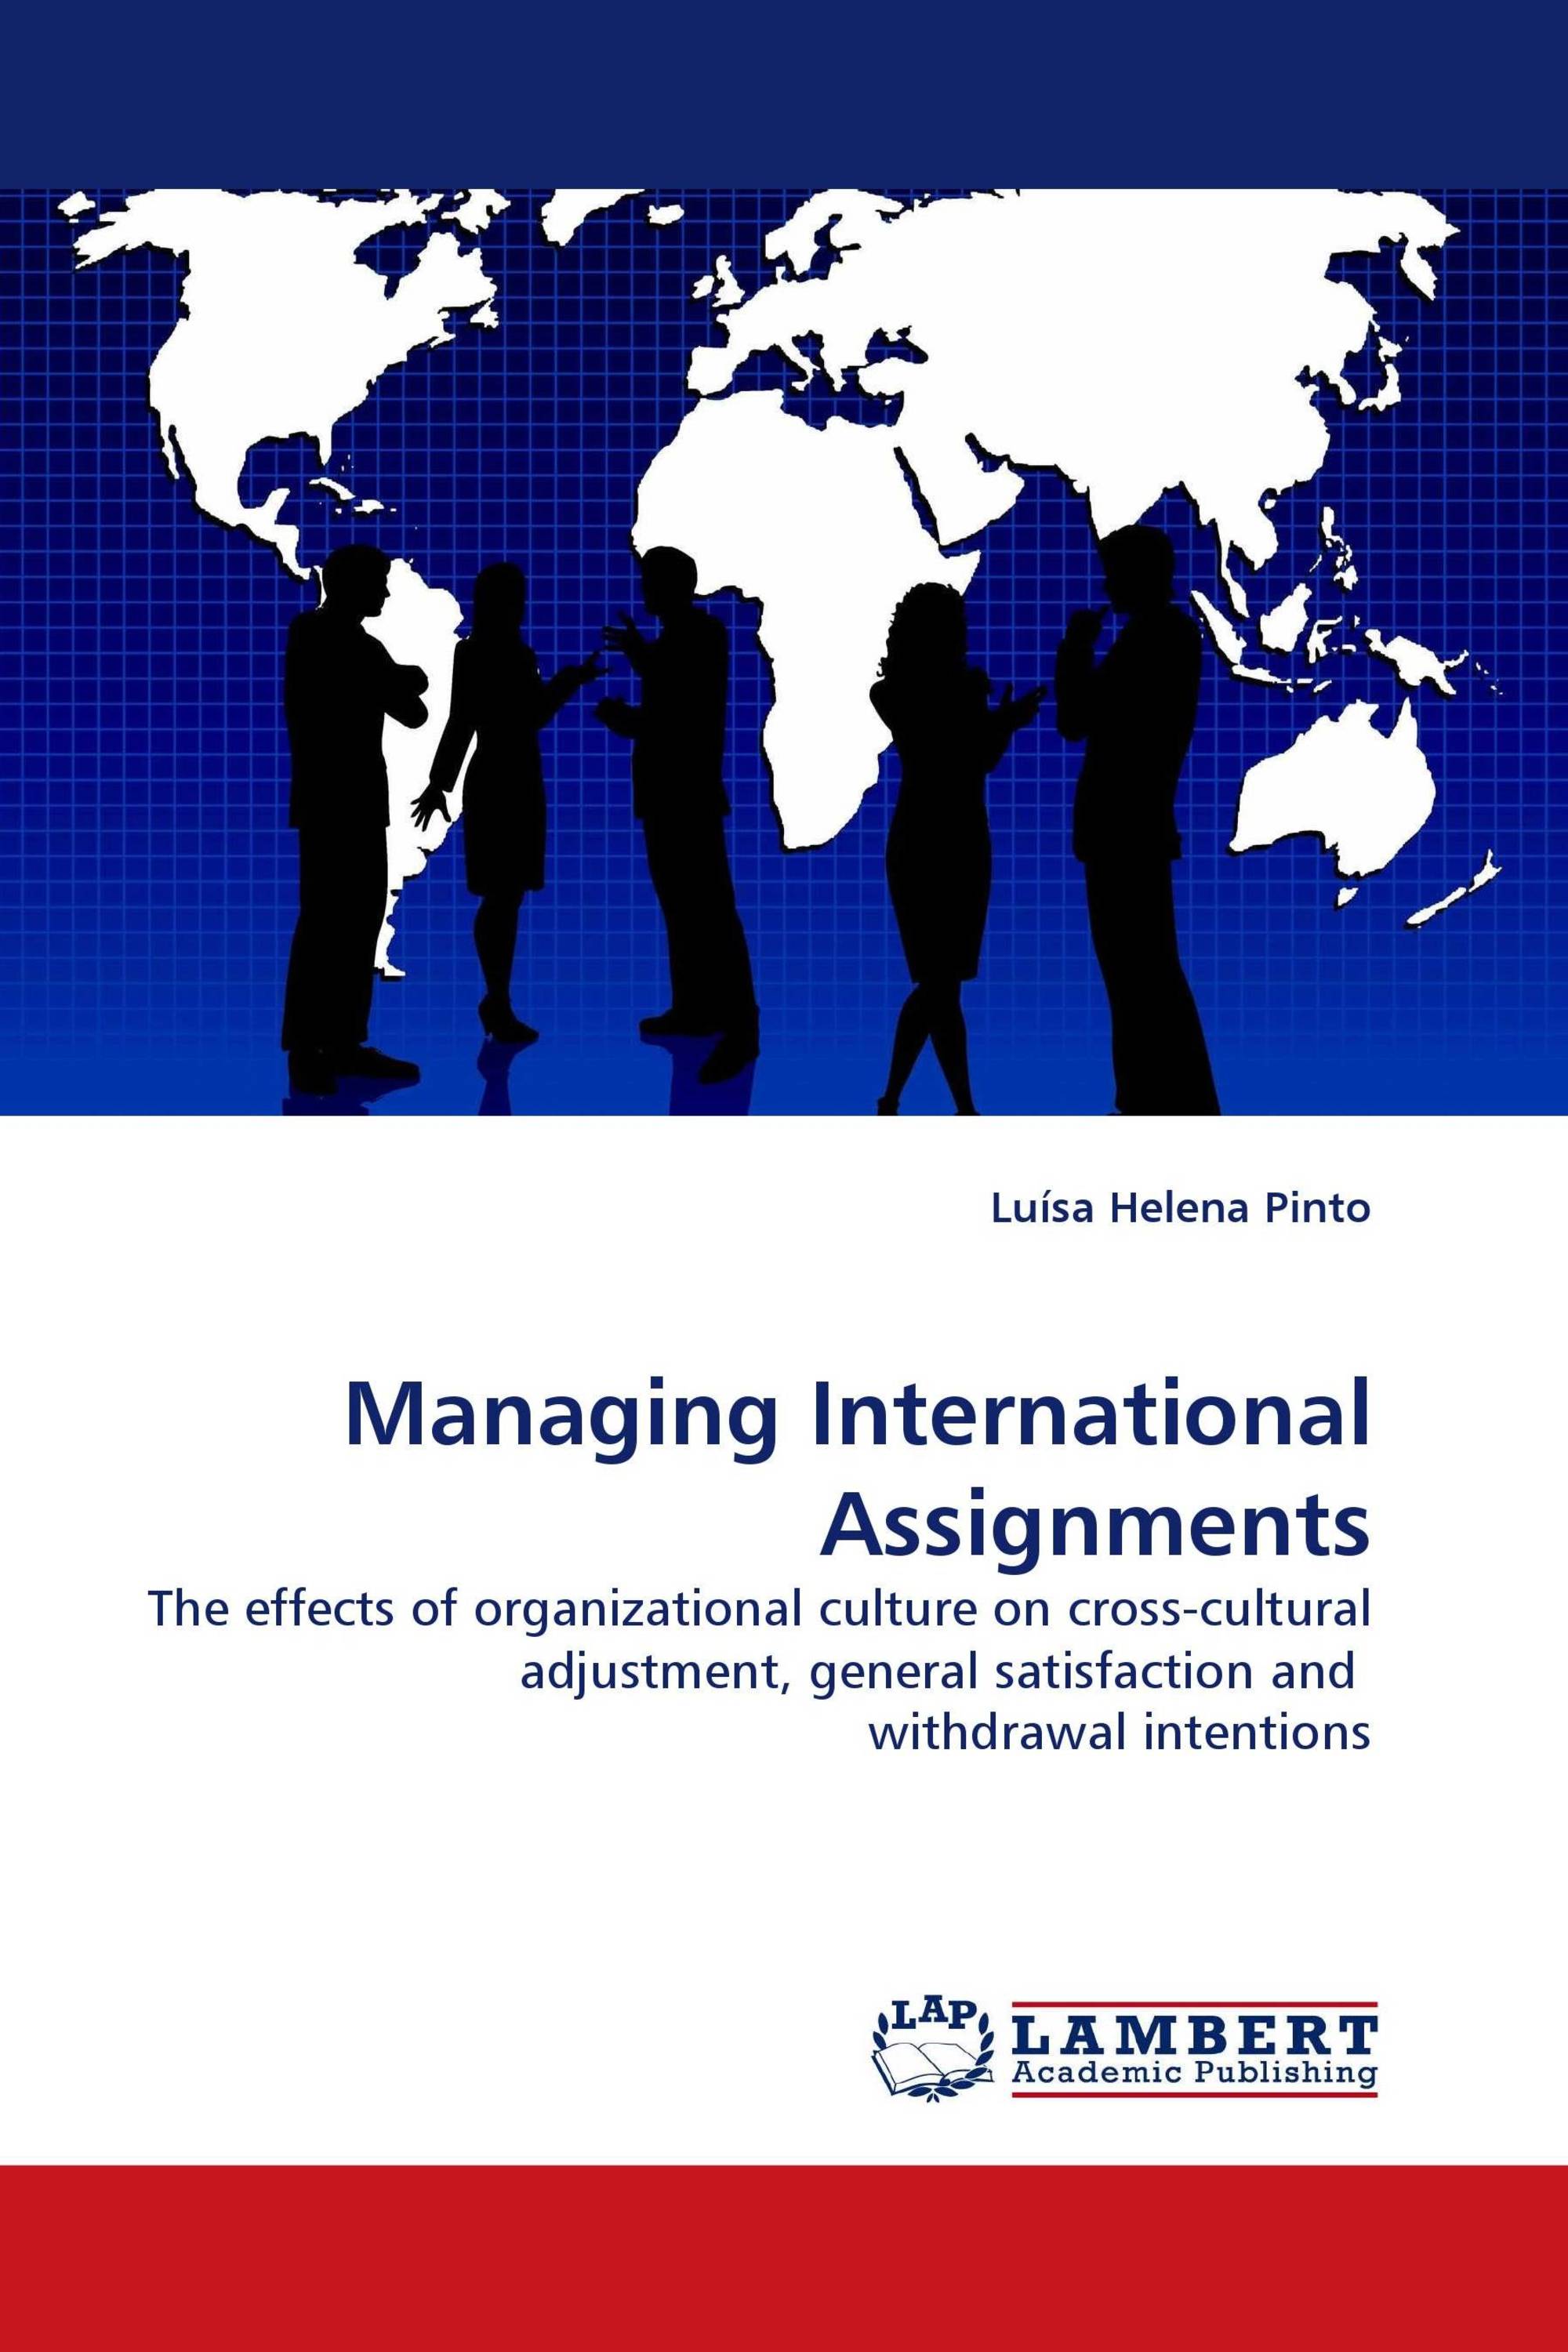 international assignments course